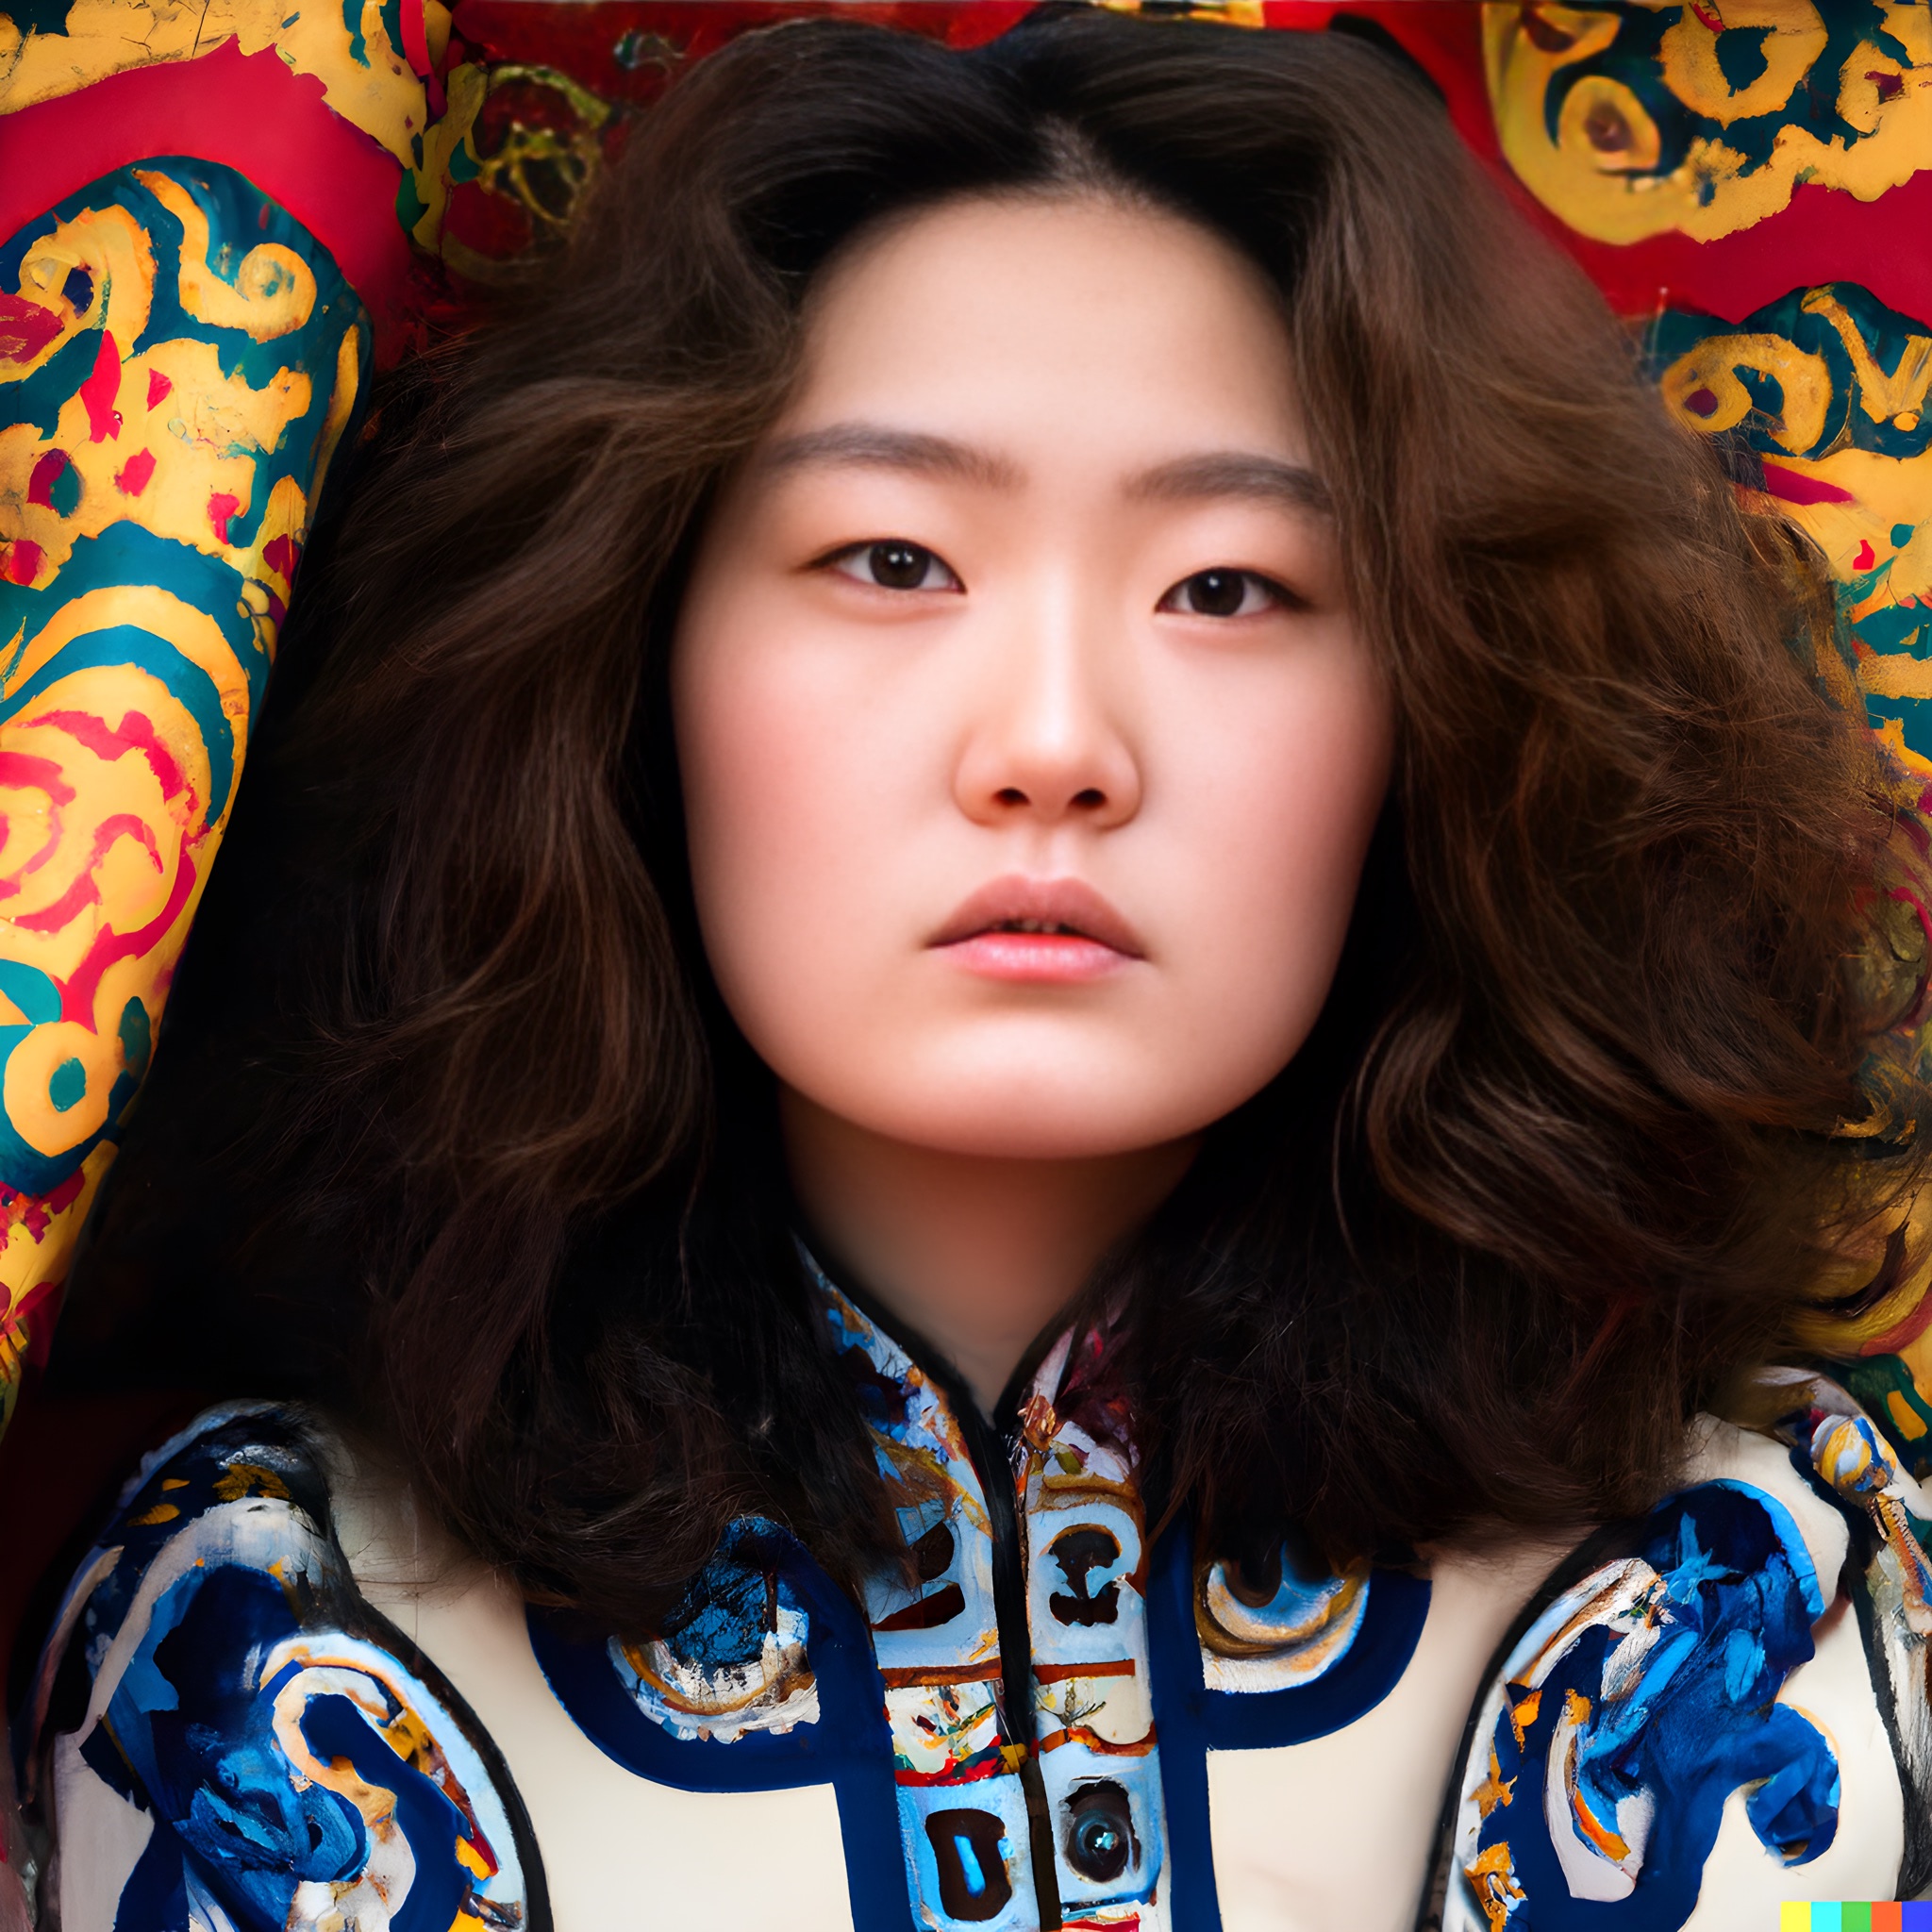 women-a-brown-curled-hair-in-a-mongolian-dress-with-intense-eyes-2